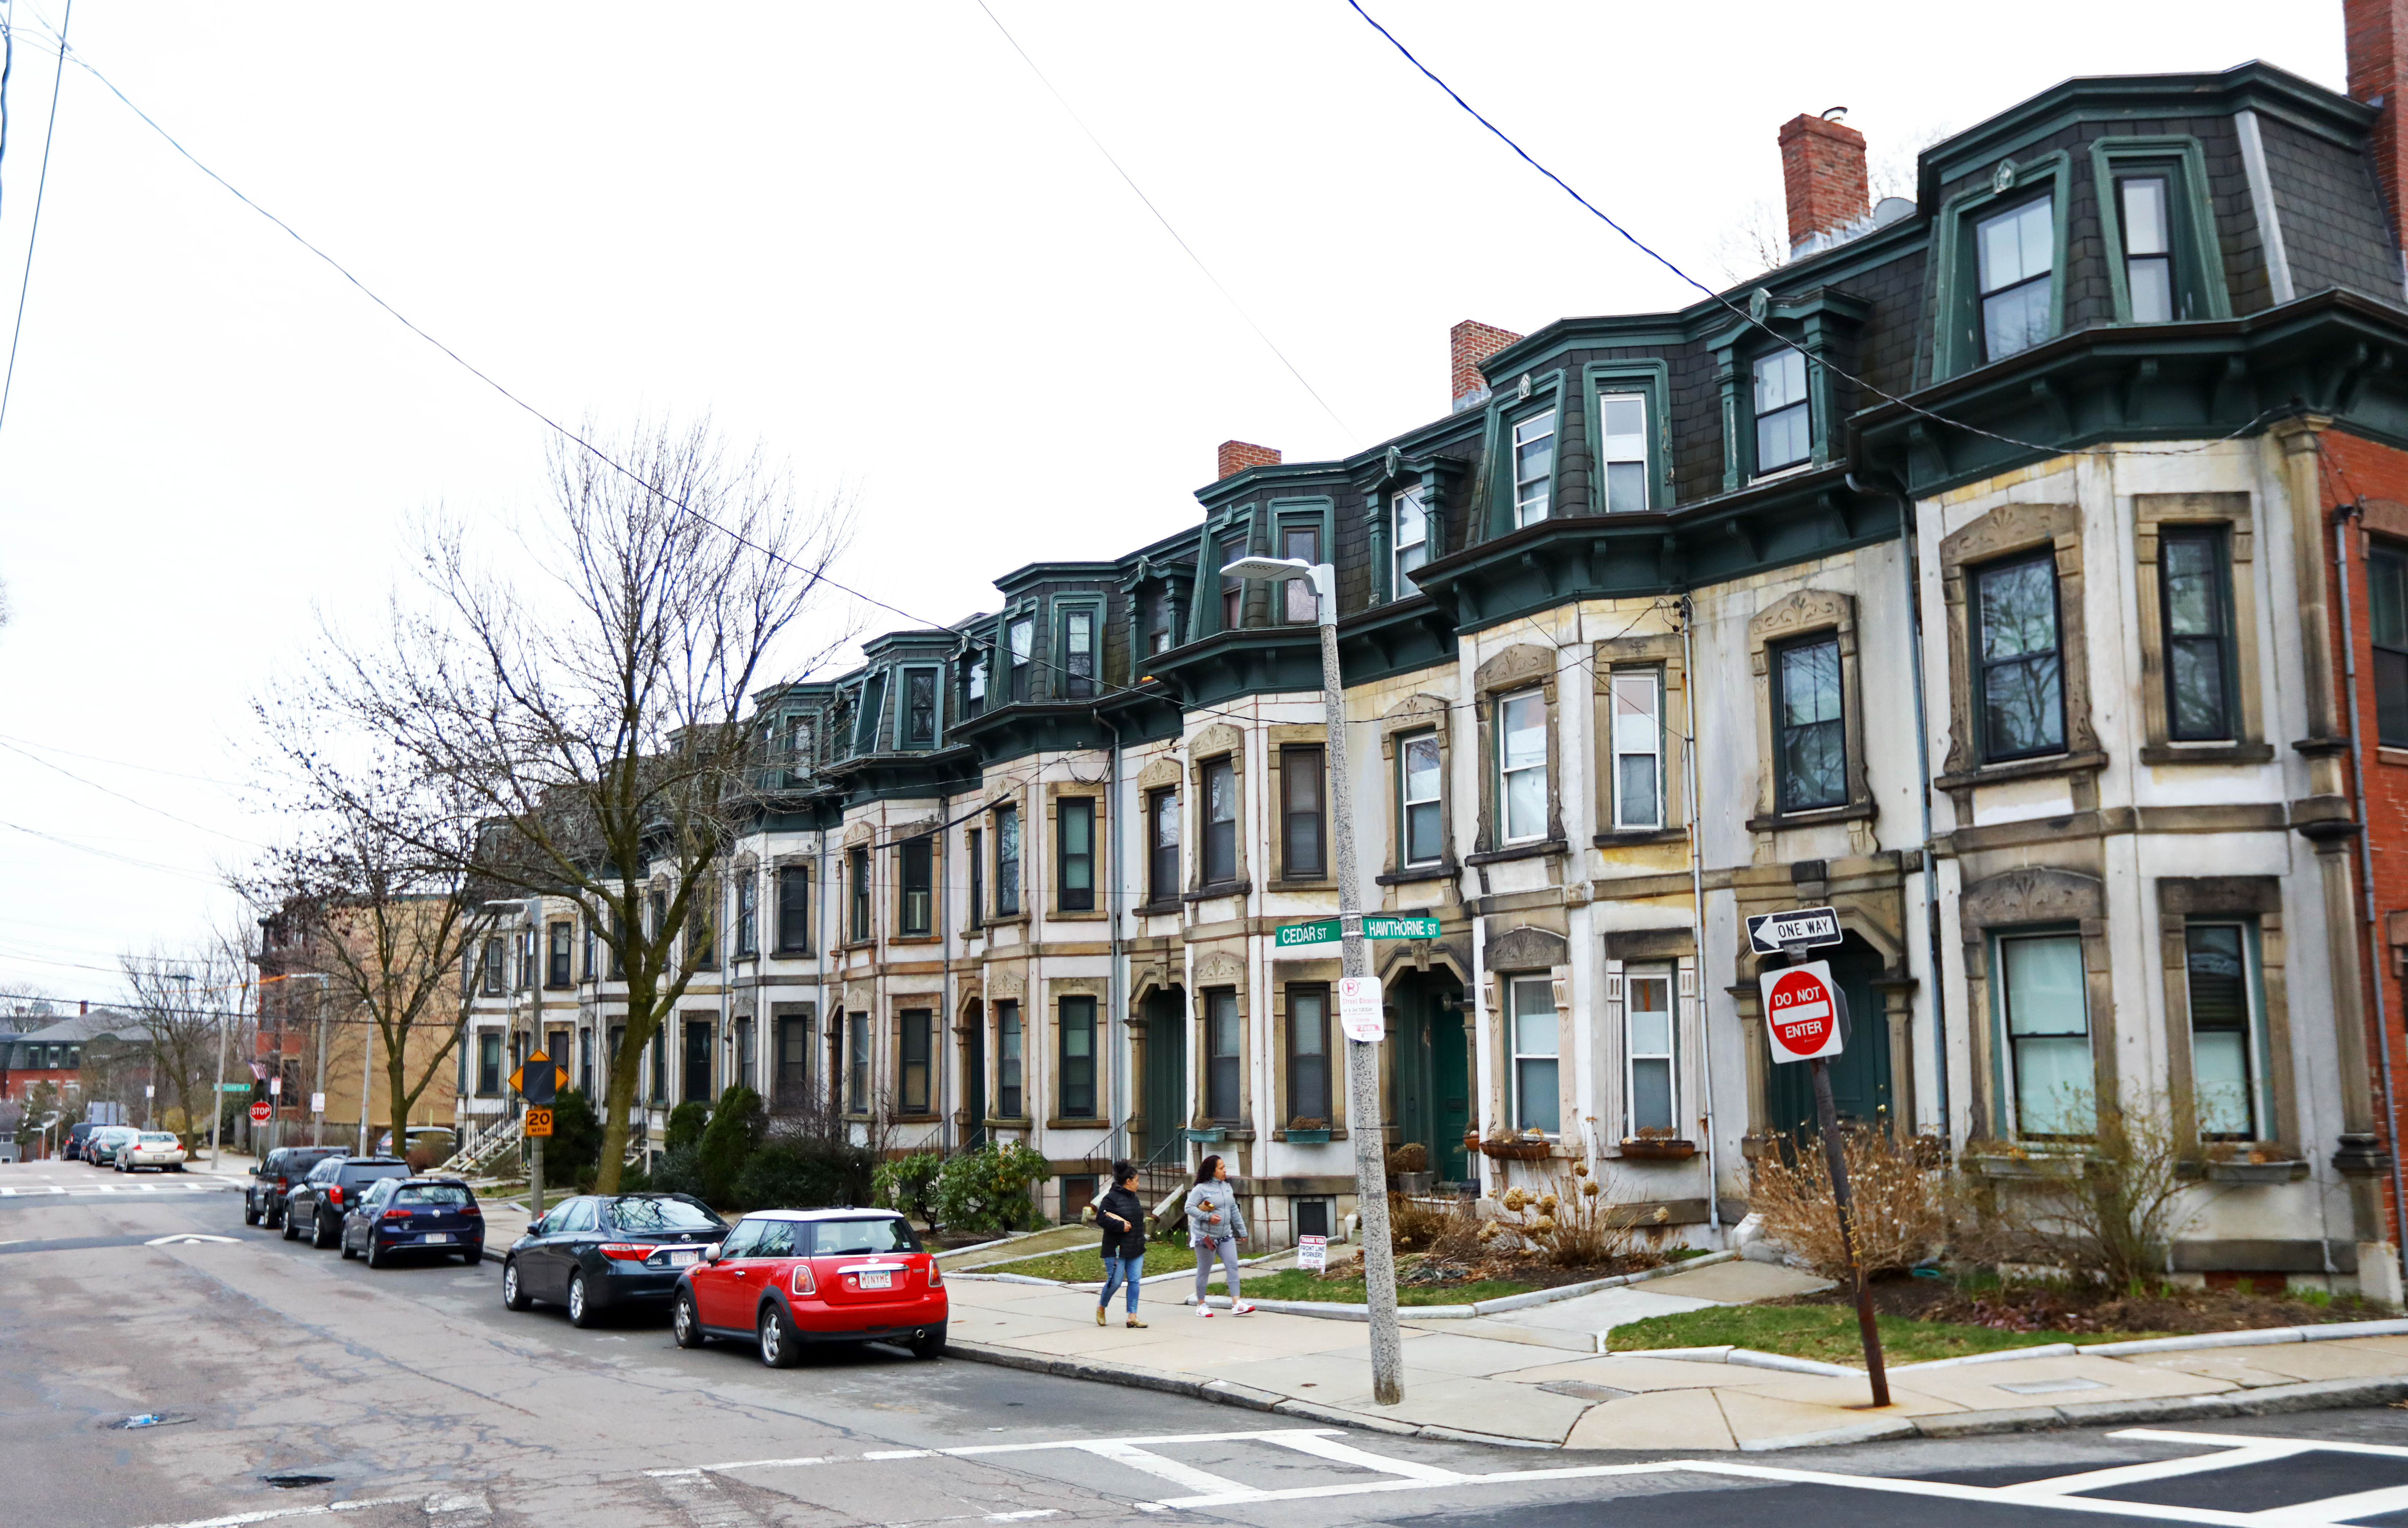 Highland Park is Boston's newest Architectural Conservation